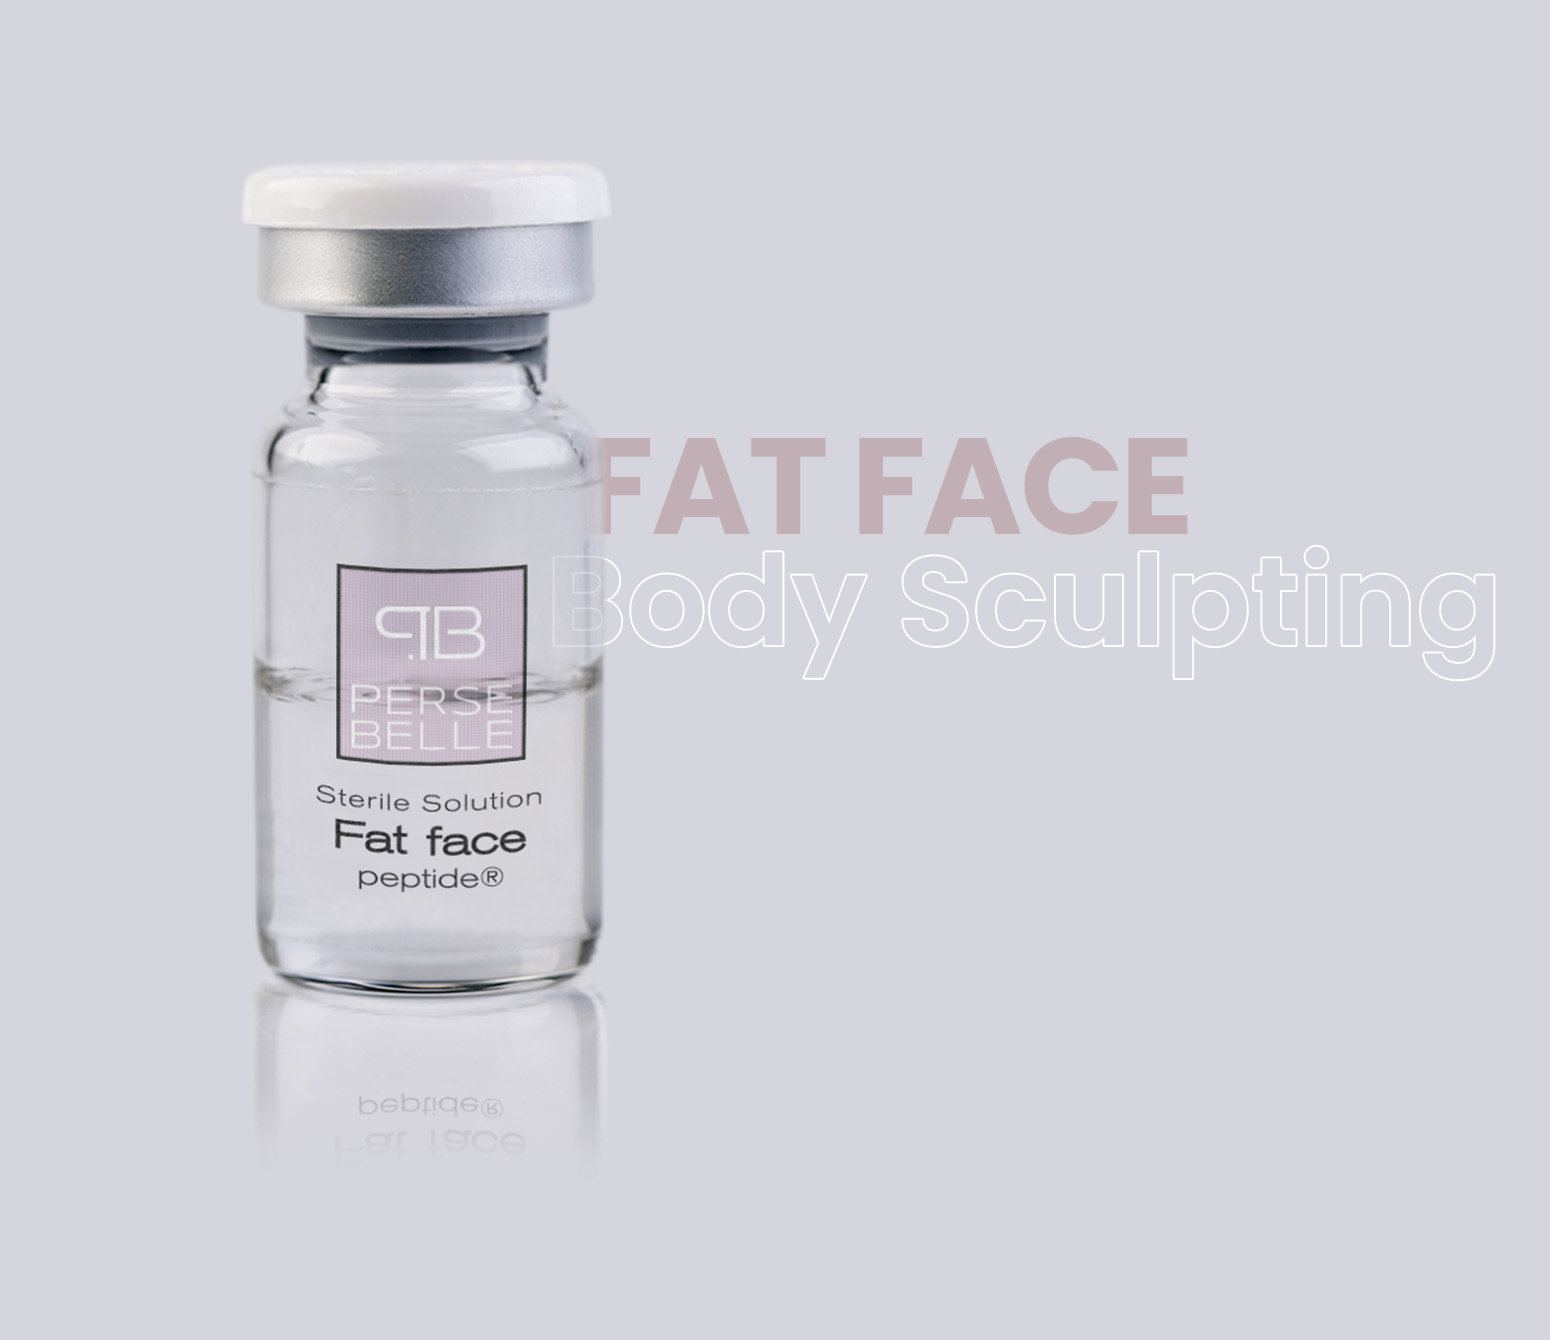 Fat Face sculpting treatment mesotherapy - Persebelle